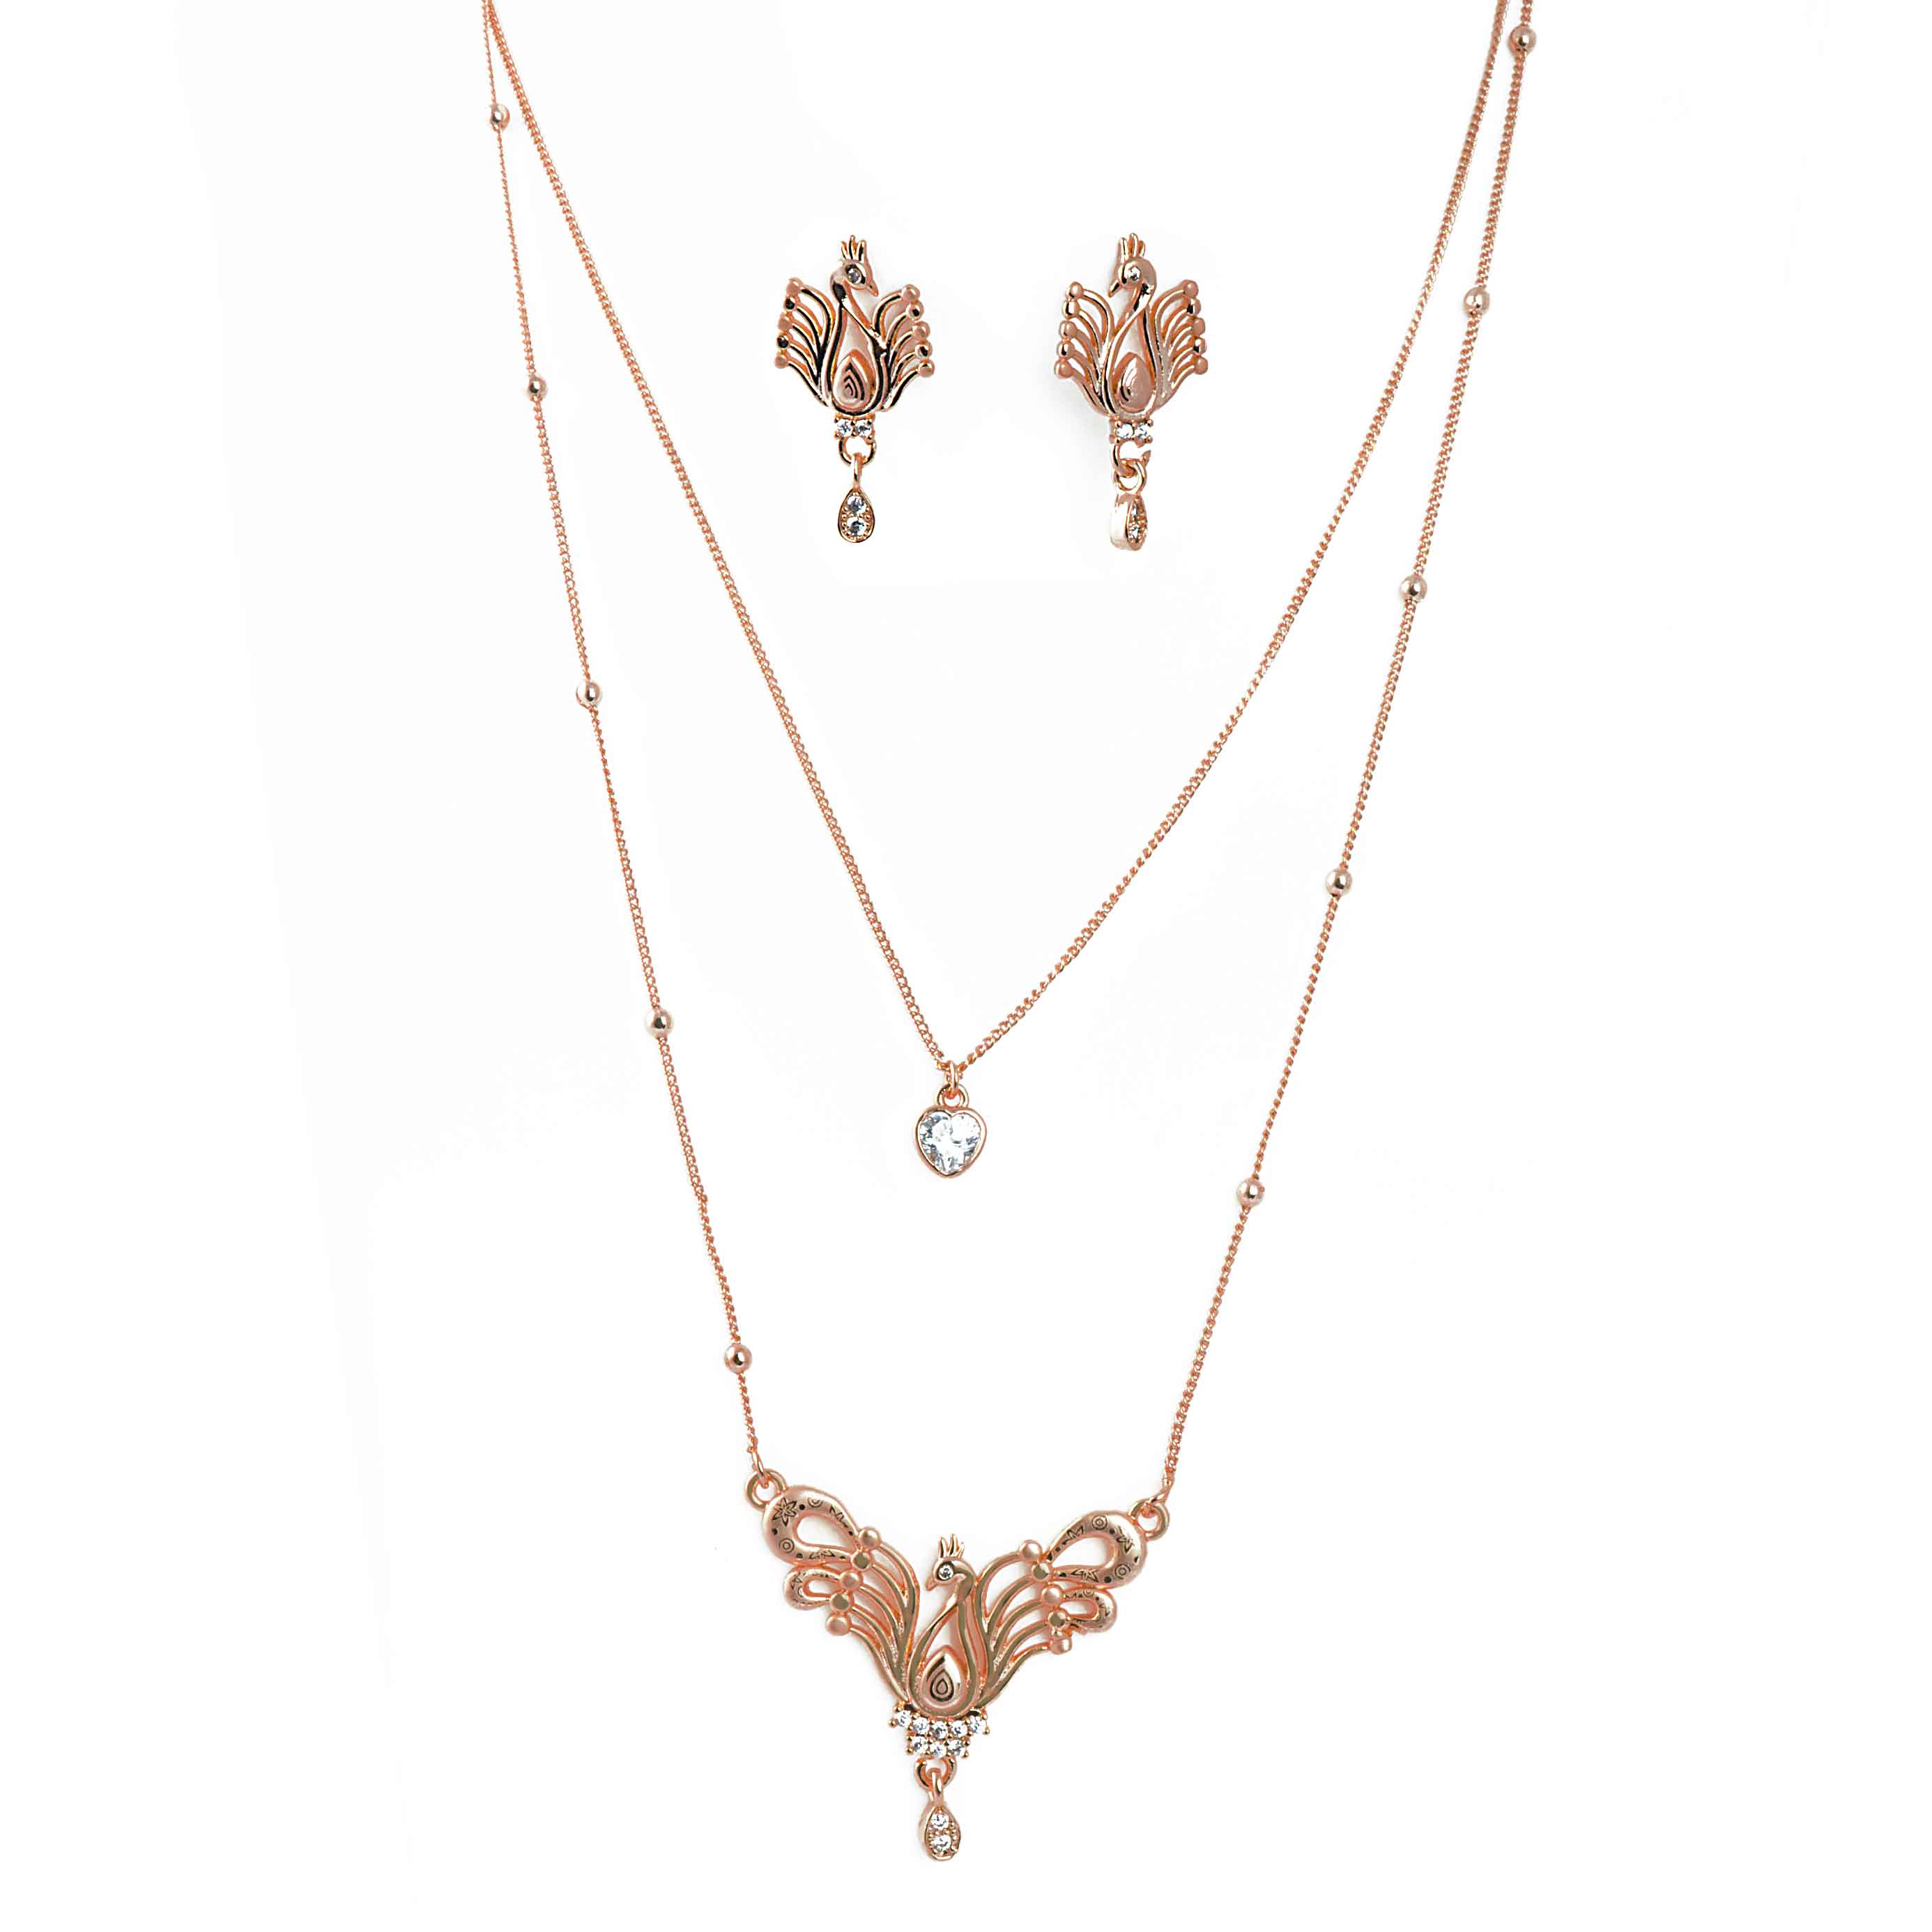 Rose Gold-Toned Two-Layered Chain Necklace